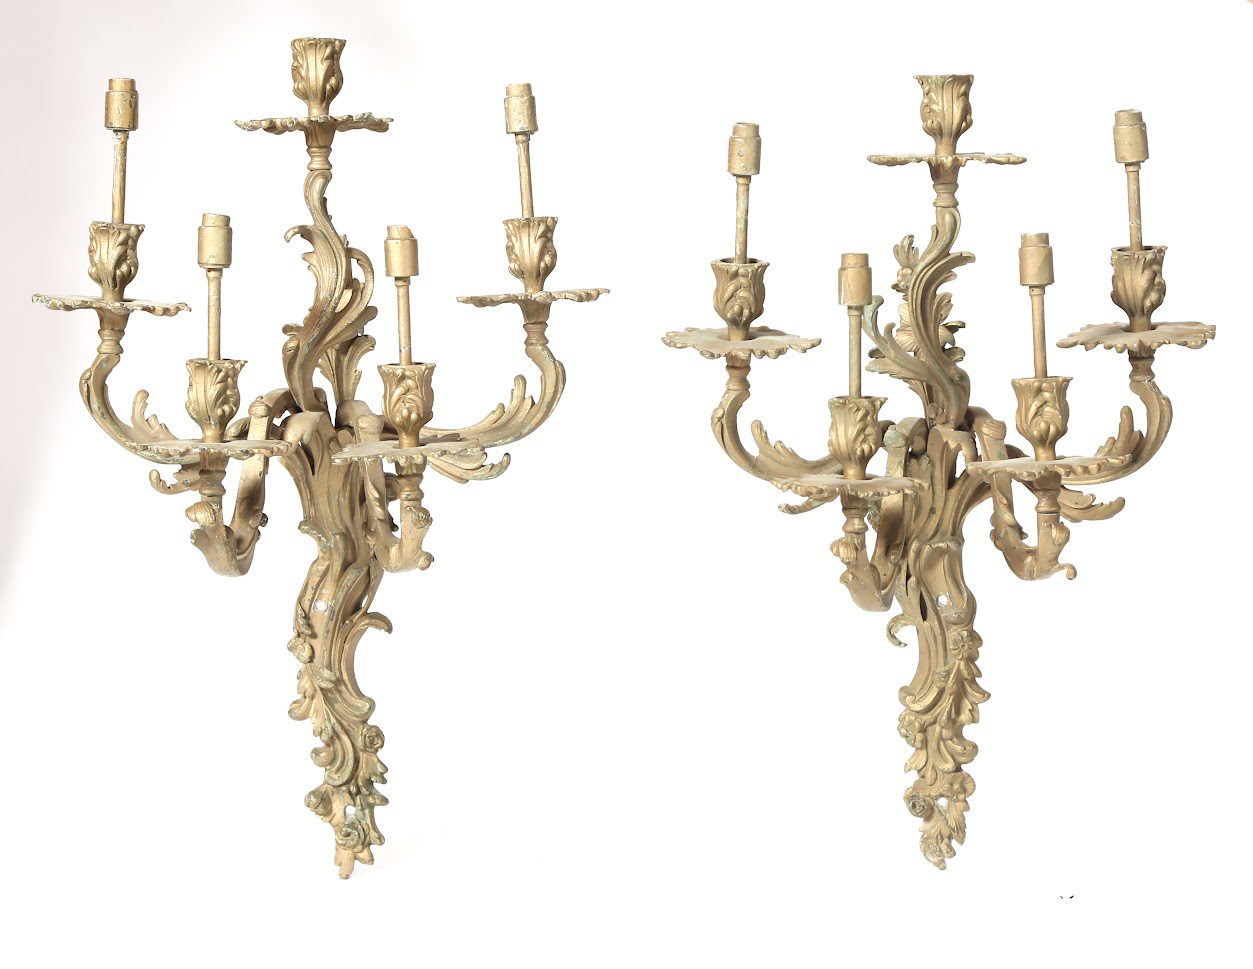 A pair of large wall sconces with gold finish.